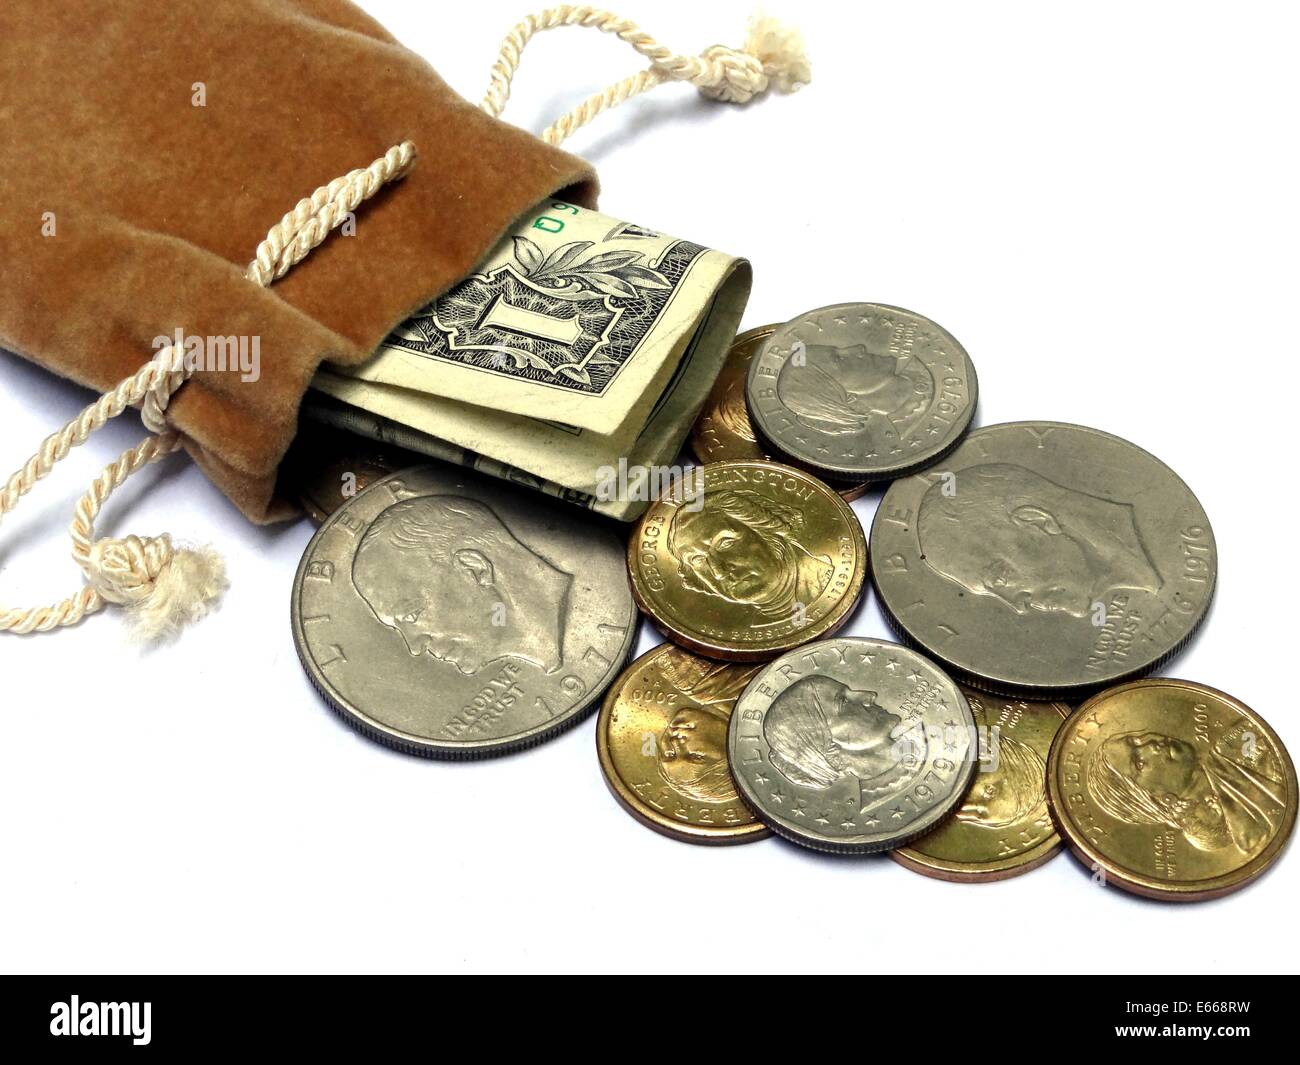 Coins protruding from a pouch. Stock Photo